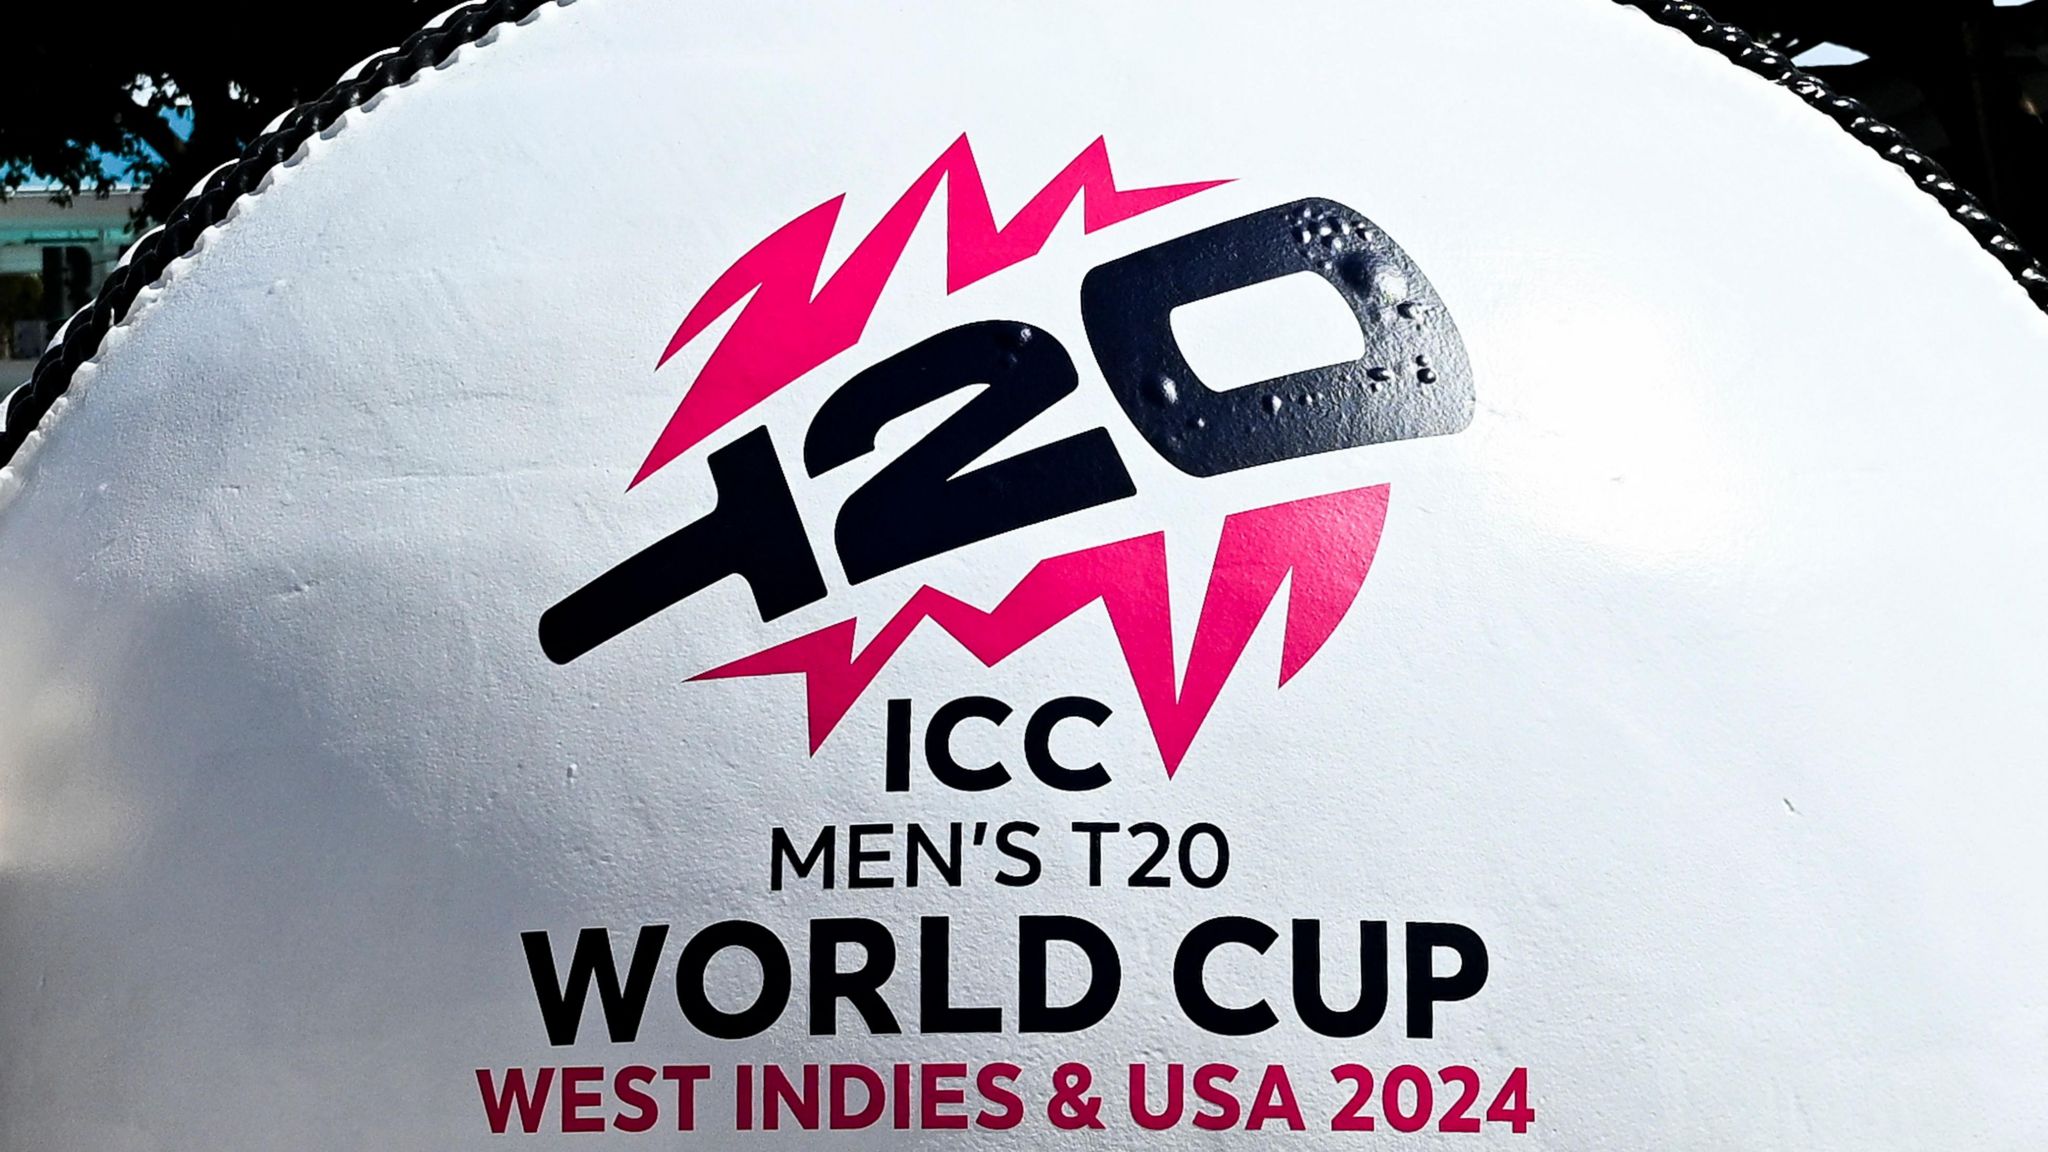 ICC Men’s T20 World Cup: Format, Teams, Groups, Rules and Previous Winners